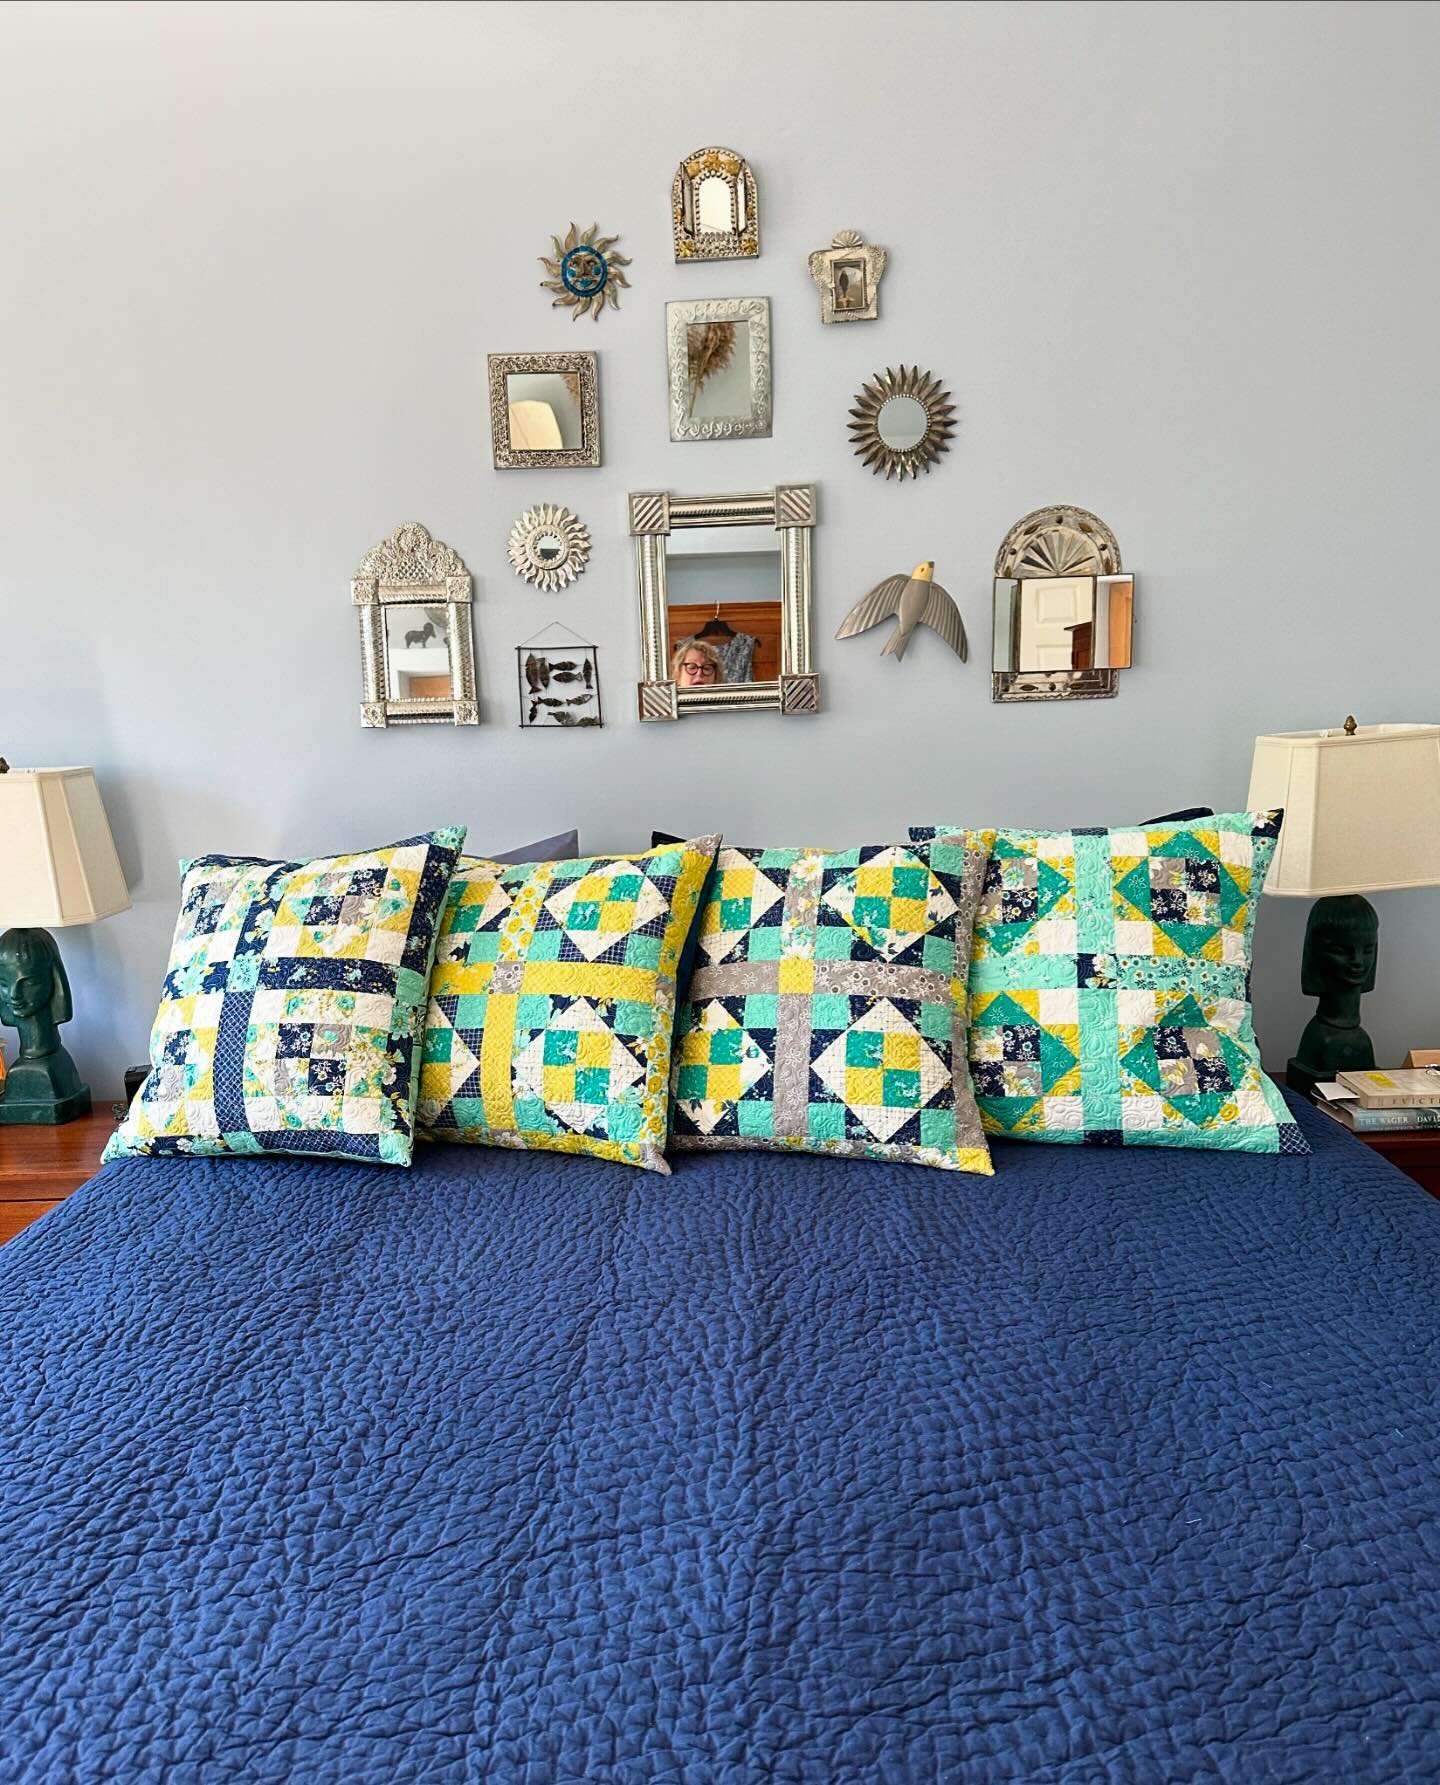 The winter comforter finally came off and in its place are a solid-color throw and these lovely pillows. Originally stitched for Moda's booth at the 2023 @hhamericas show, they're now creating a bright and cheery feel in my bedroom. Thank you, @modaf